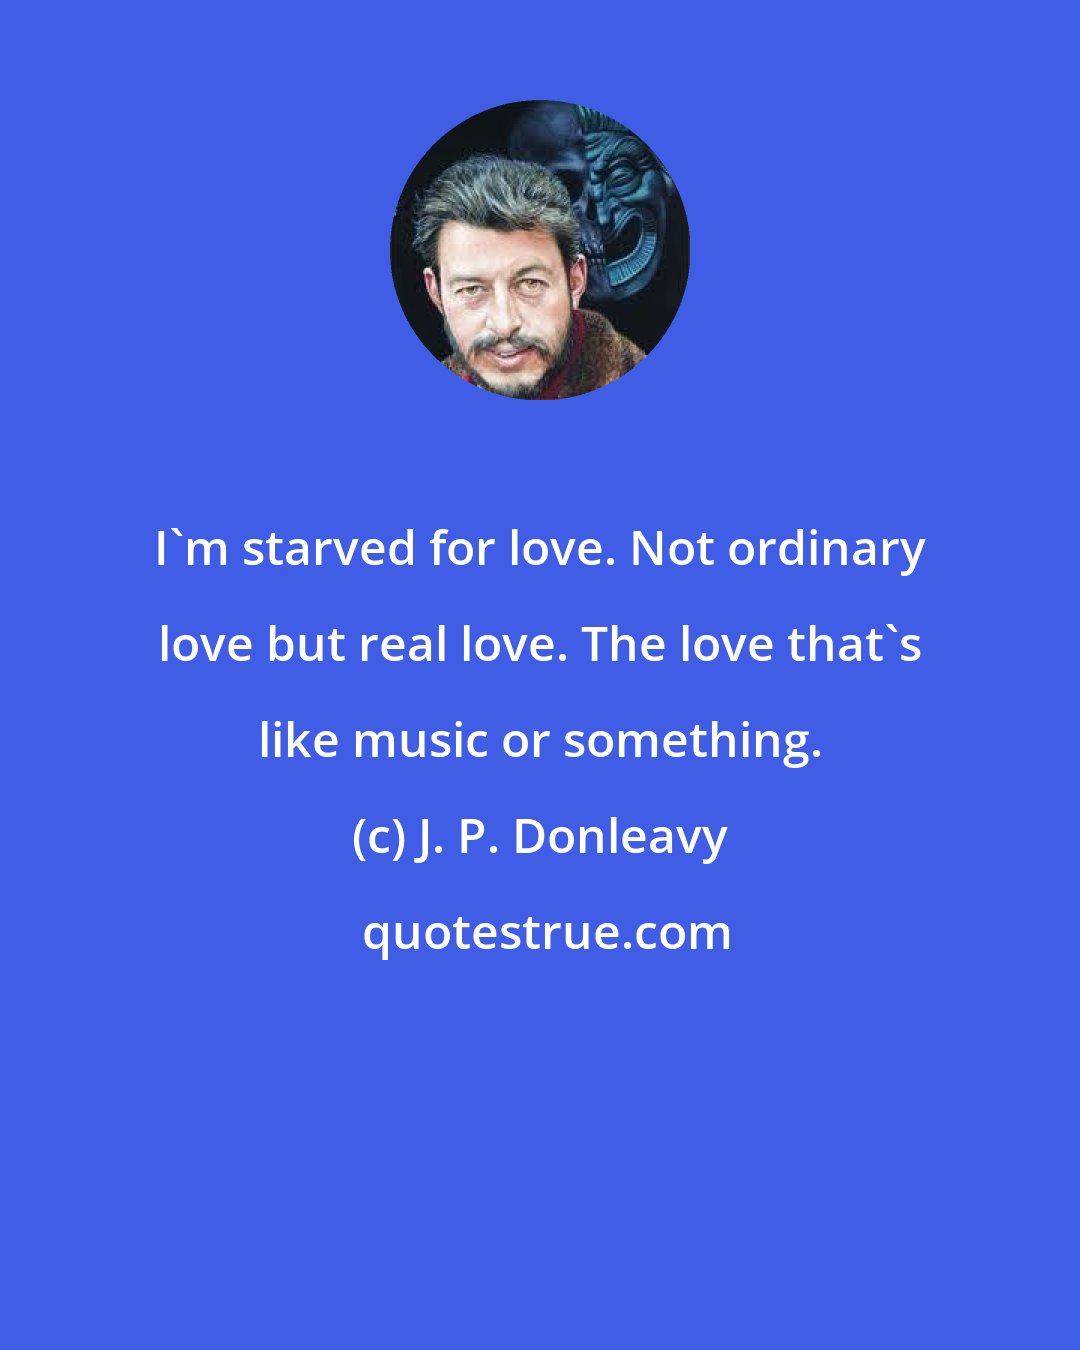 J. P. Donleavy: I'm starved for love. Not ordinary love but real love. The love that's like music or something.